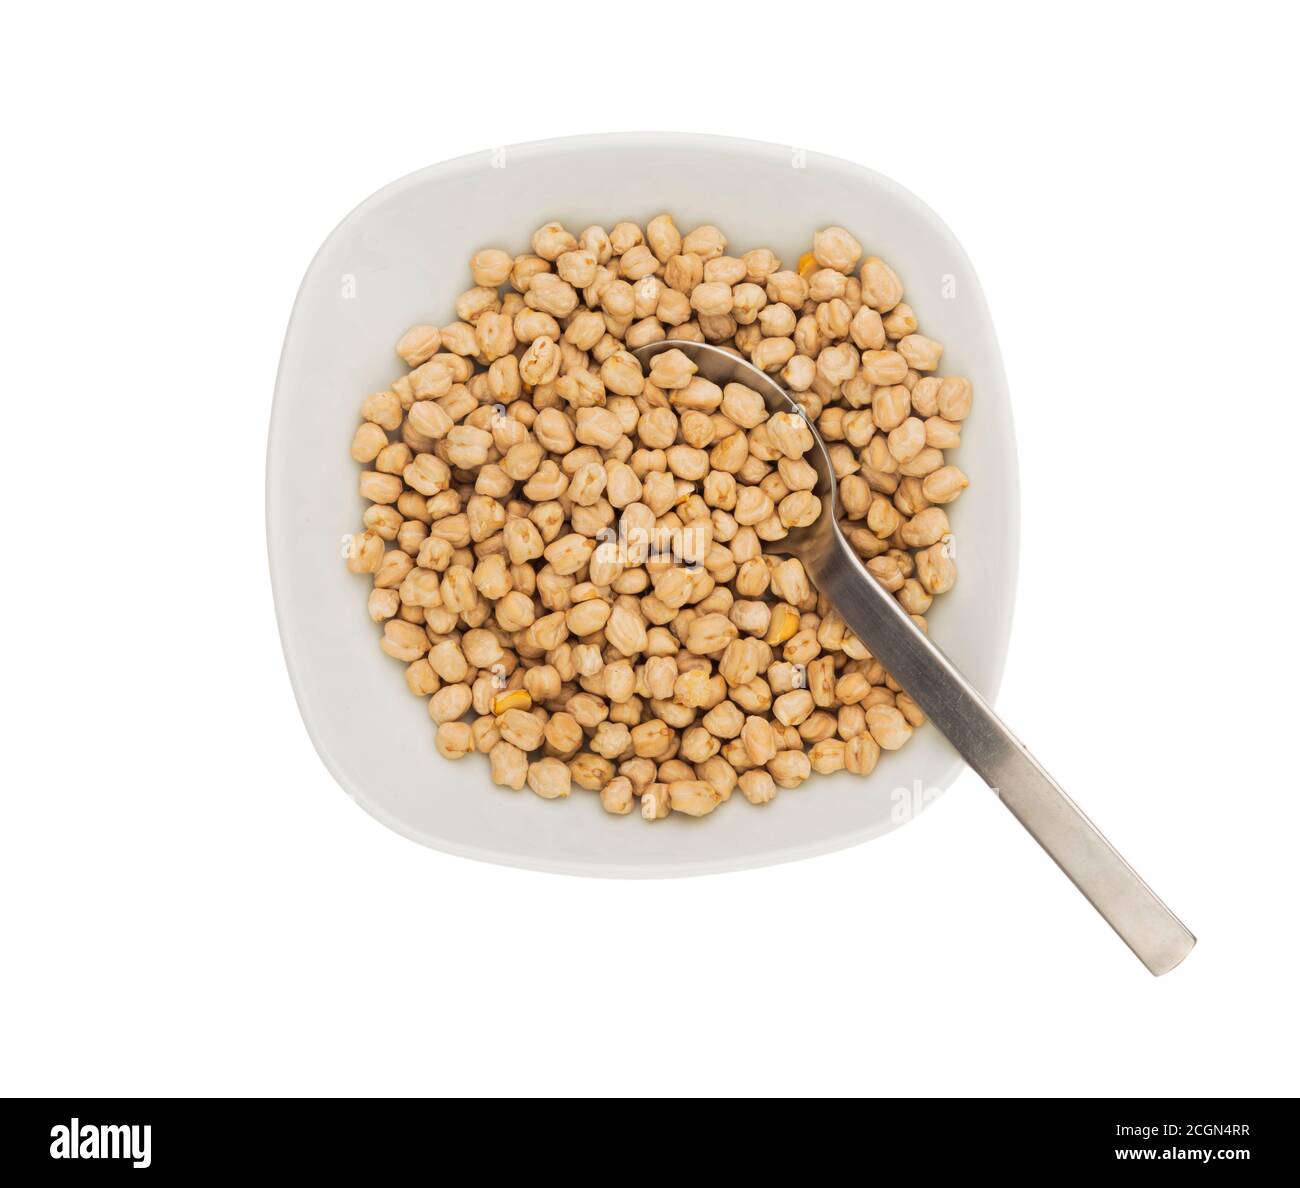 Uncooked raw chickpeas in a plate with spoon Stock Photo